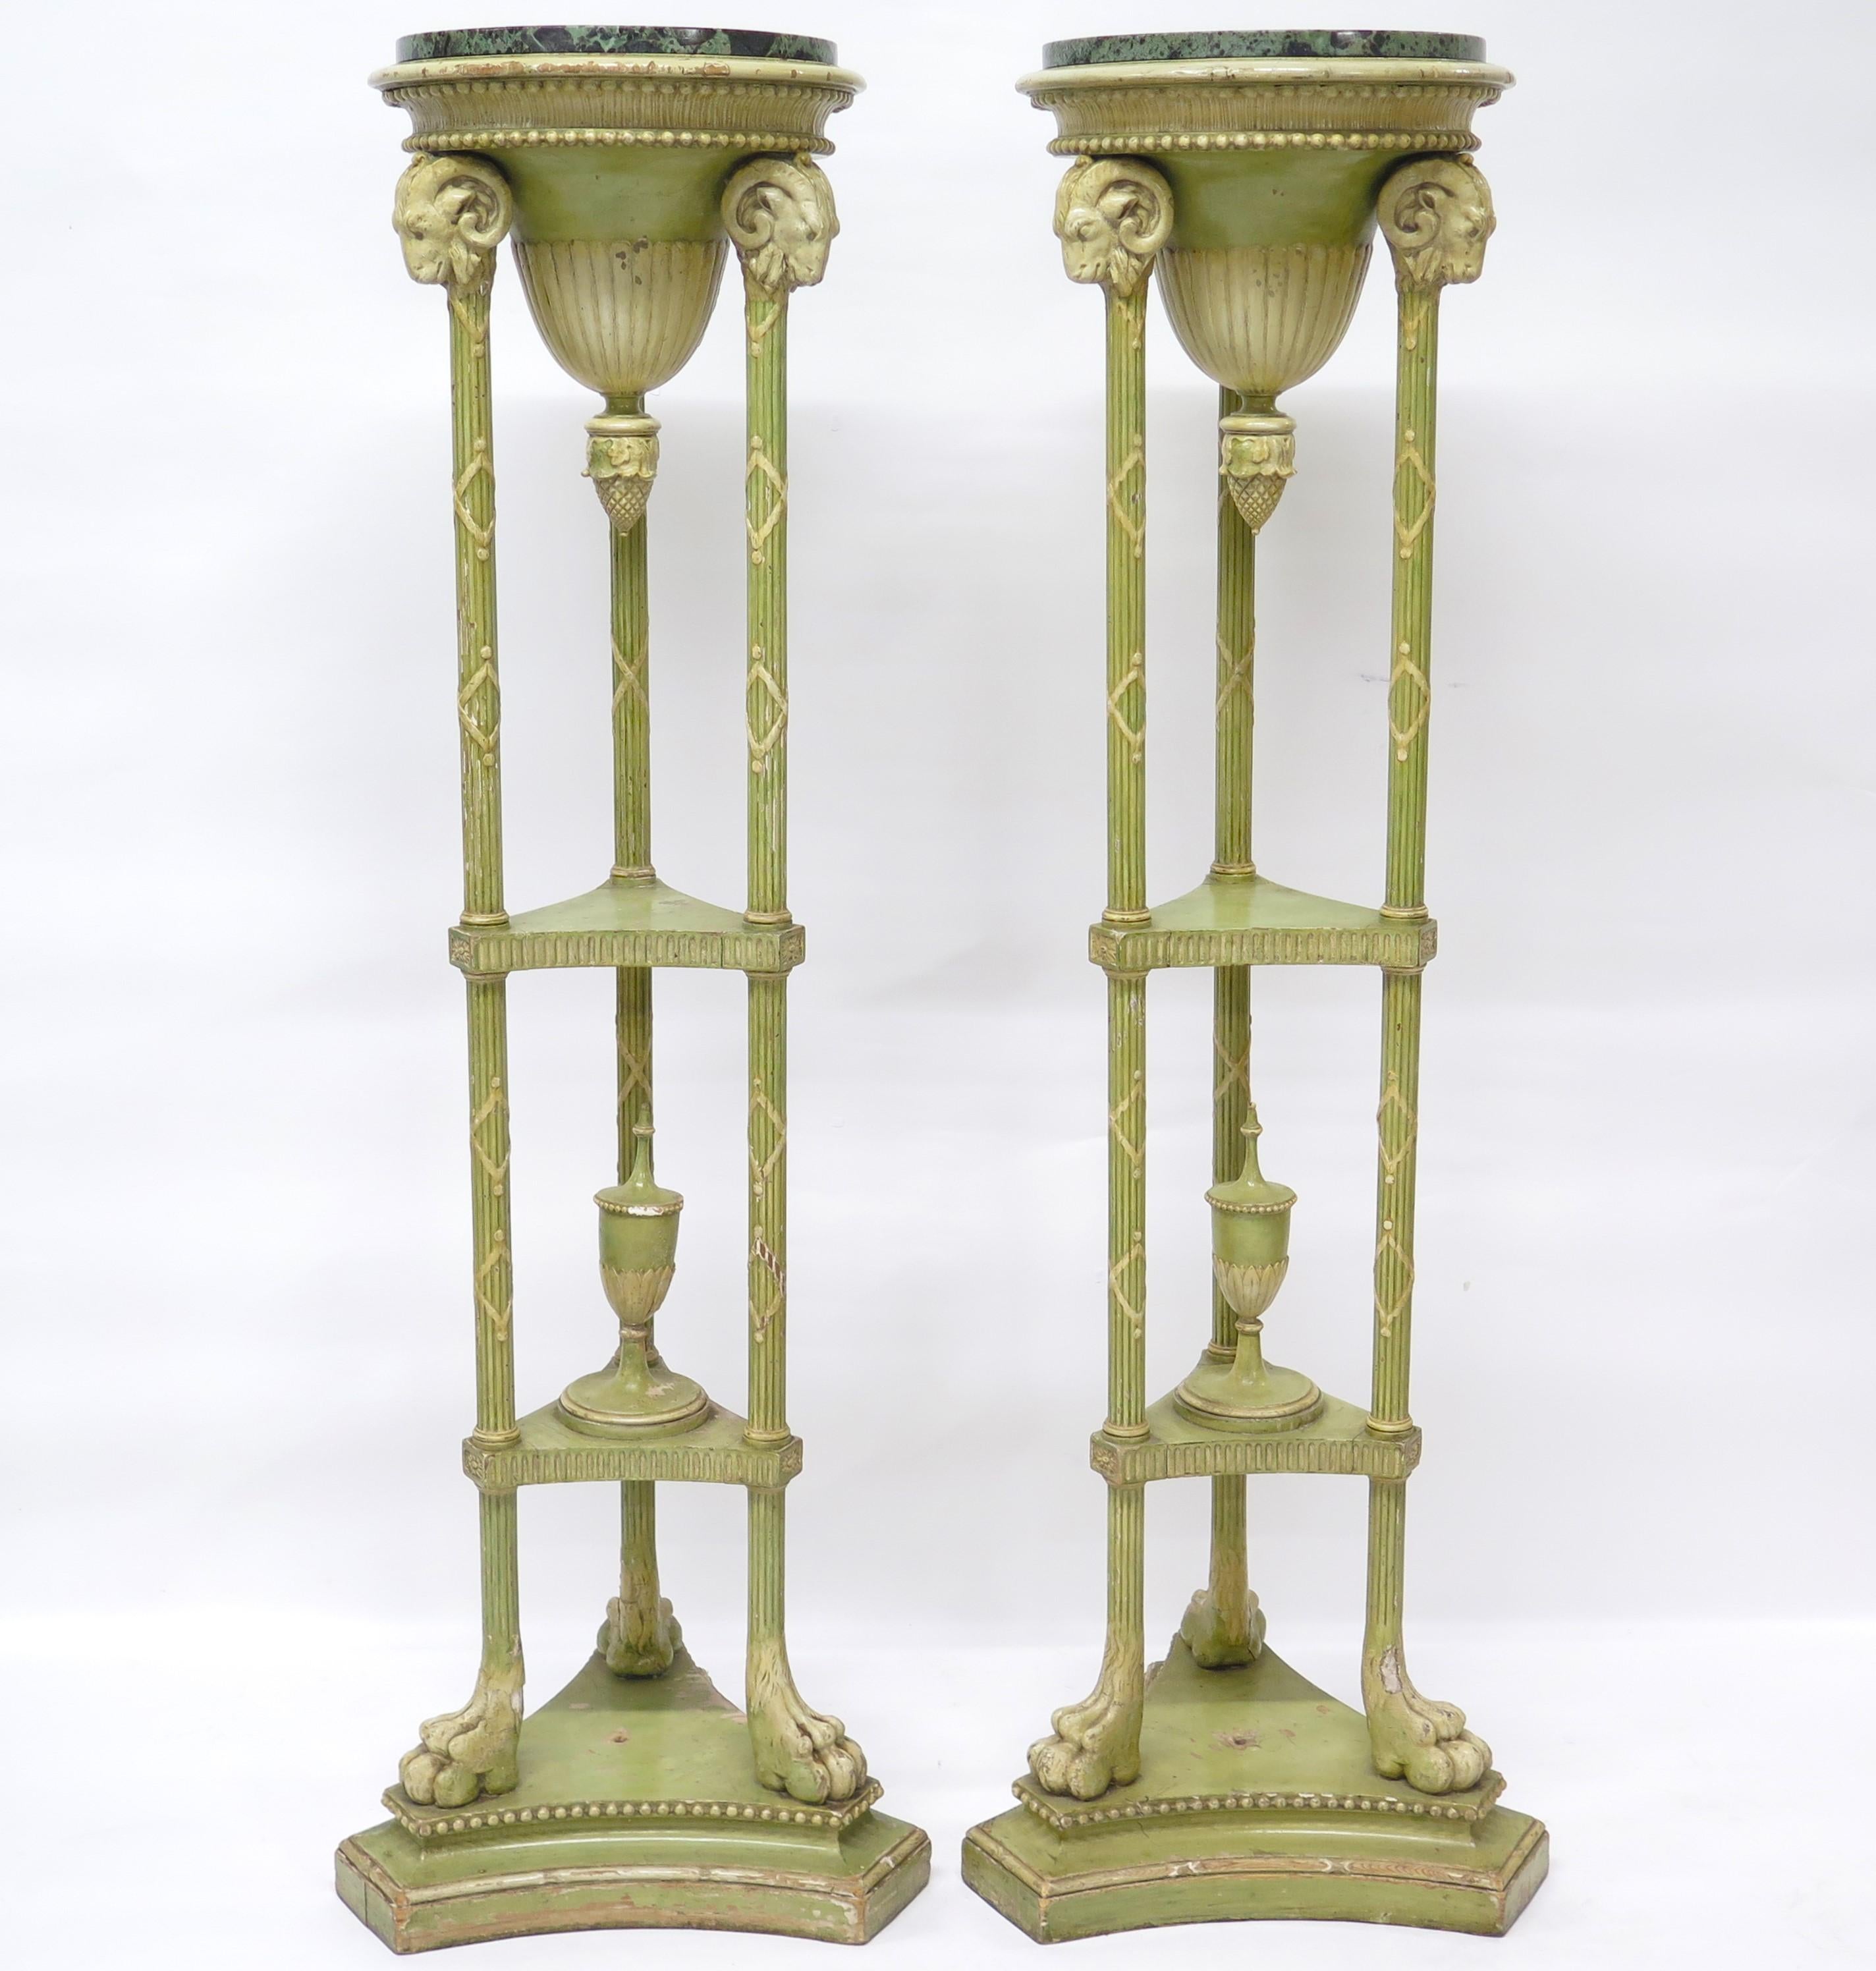 a handsome, tall, slender, elegant pair of Adam-style painted (greenish) candle stands (or plant stands) supported by three columns with lion's paw feet and ram's heads, green grey and black round marble tops. England, Edwardian, circa 1910 

60